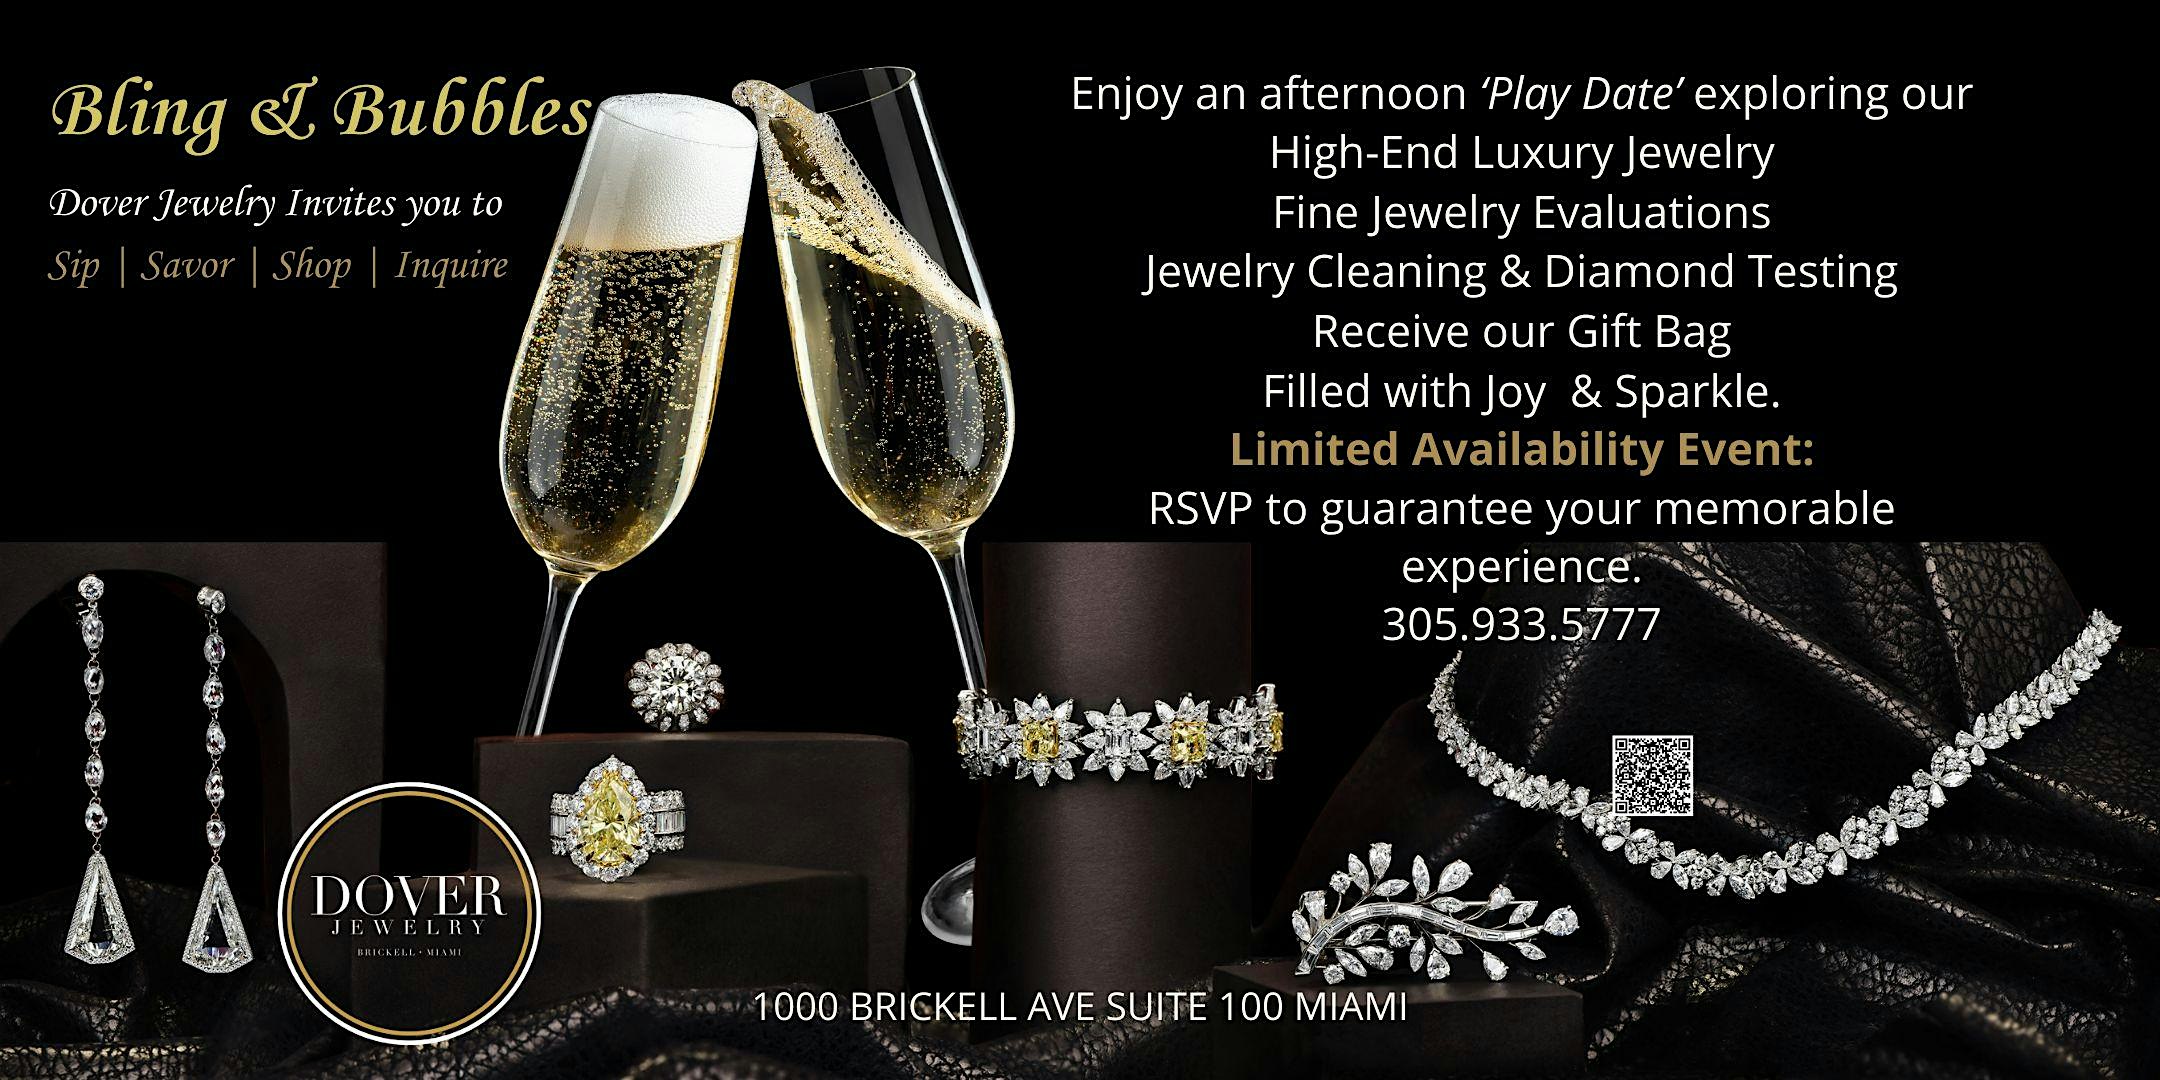 Dover Jewelry & Diamond : Bling and Bubbles